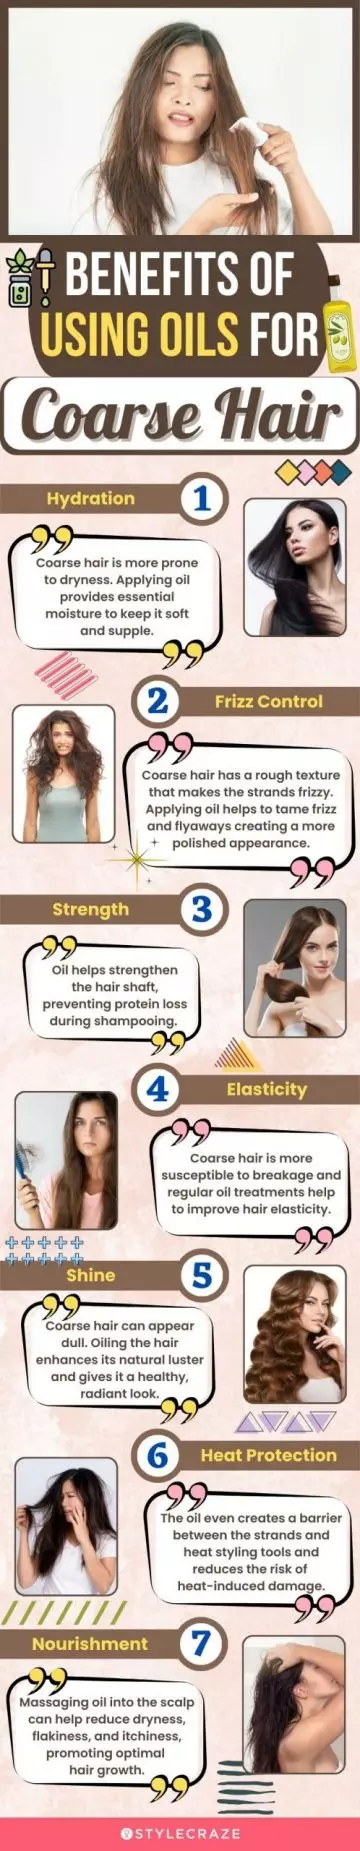 Benefits Of Using Oil For Coarse Hair (infographic)